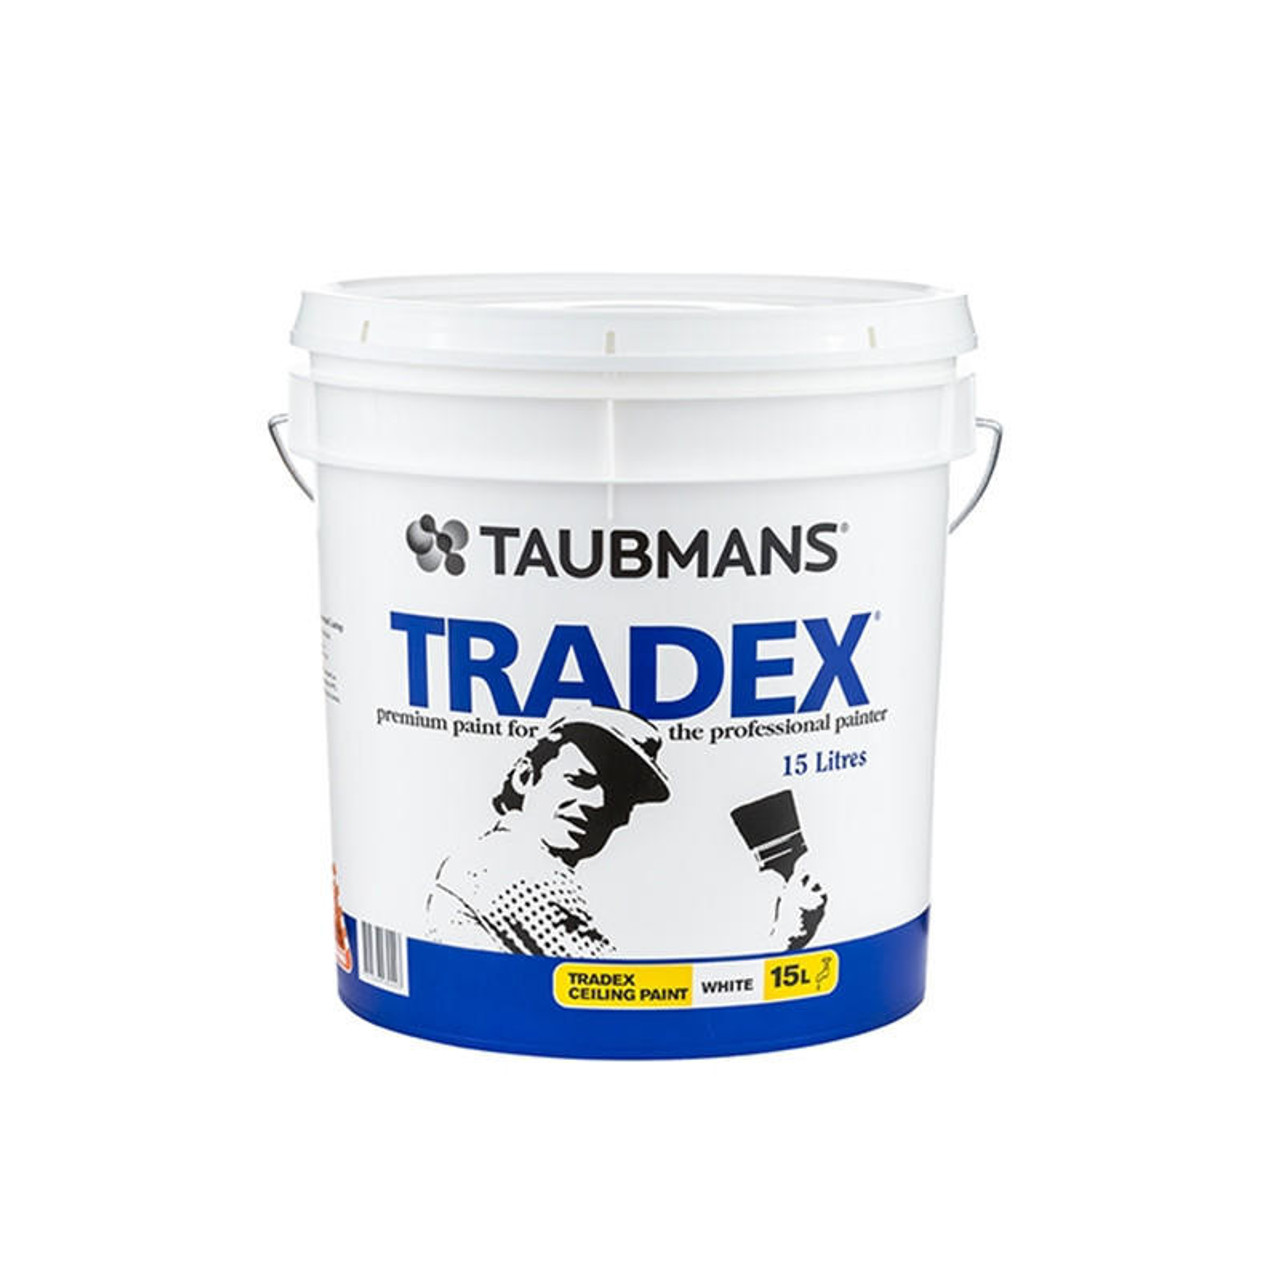 Taubmans Tradex 15L White Ceiling Paint